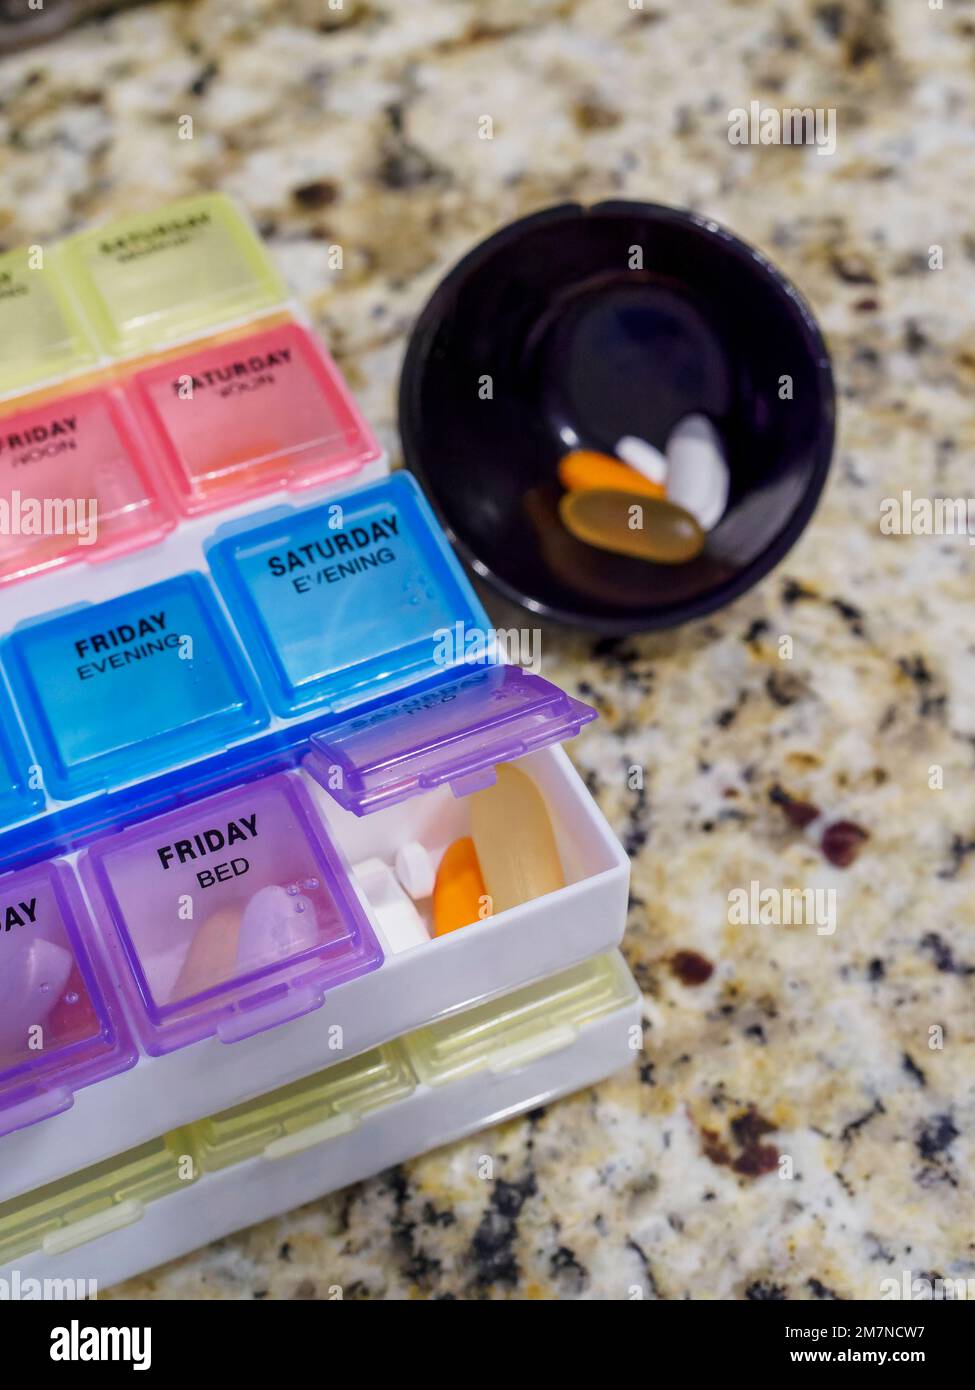 Prescription pill box for medication or vitamins or supplements for daily medication doses. Stock Photo